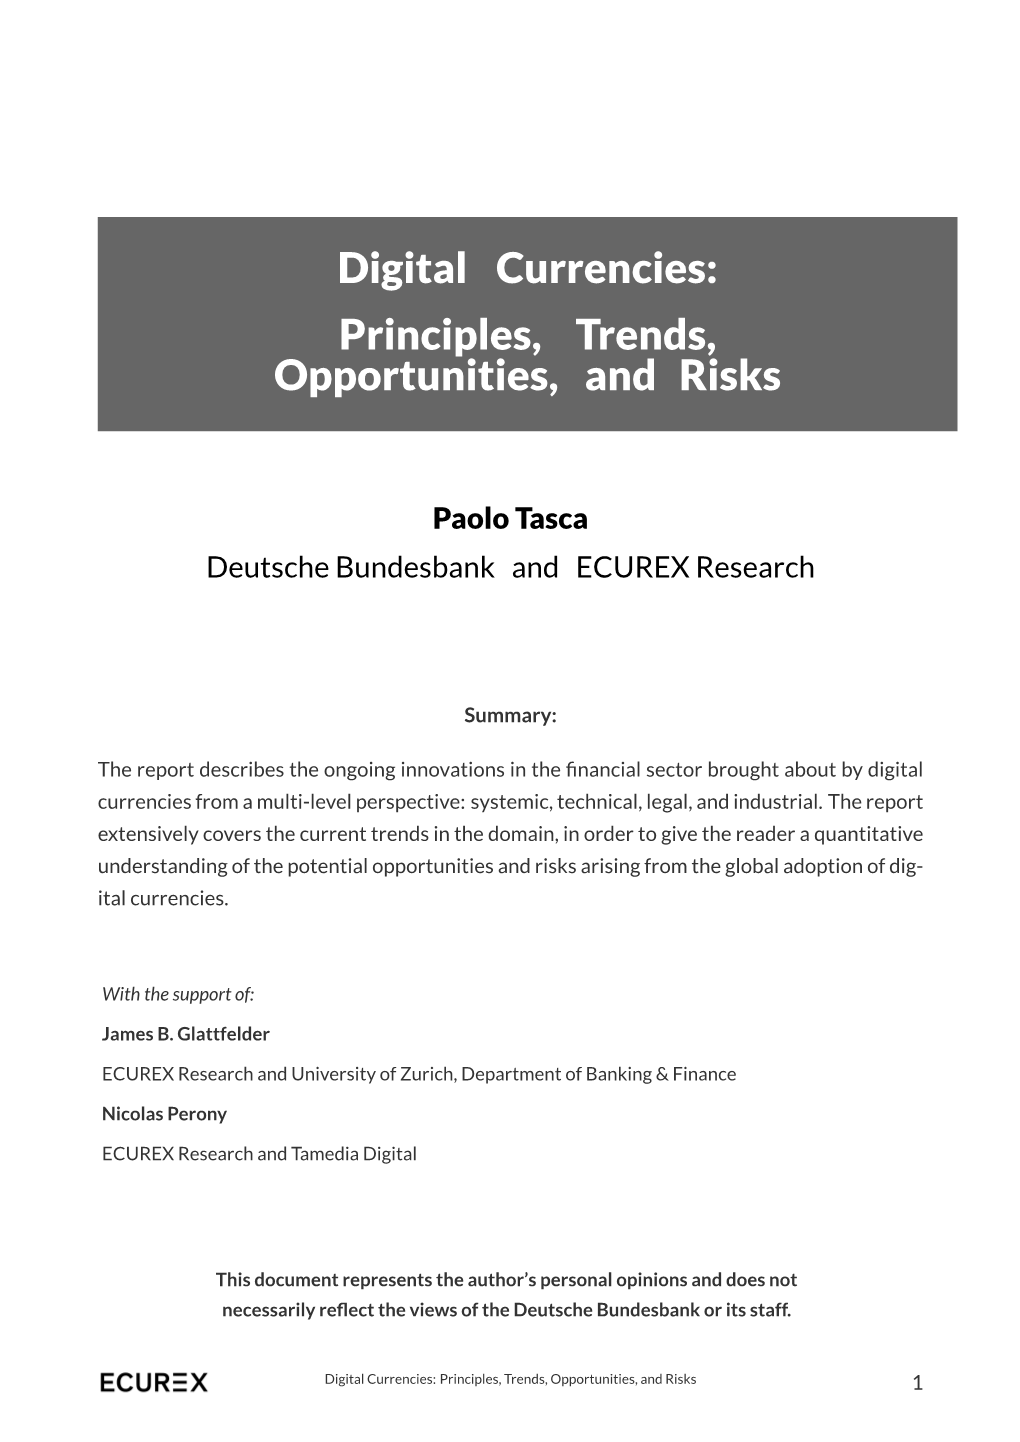 Digital Currencies: Principles, Trends, Opportunities, and Risks